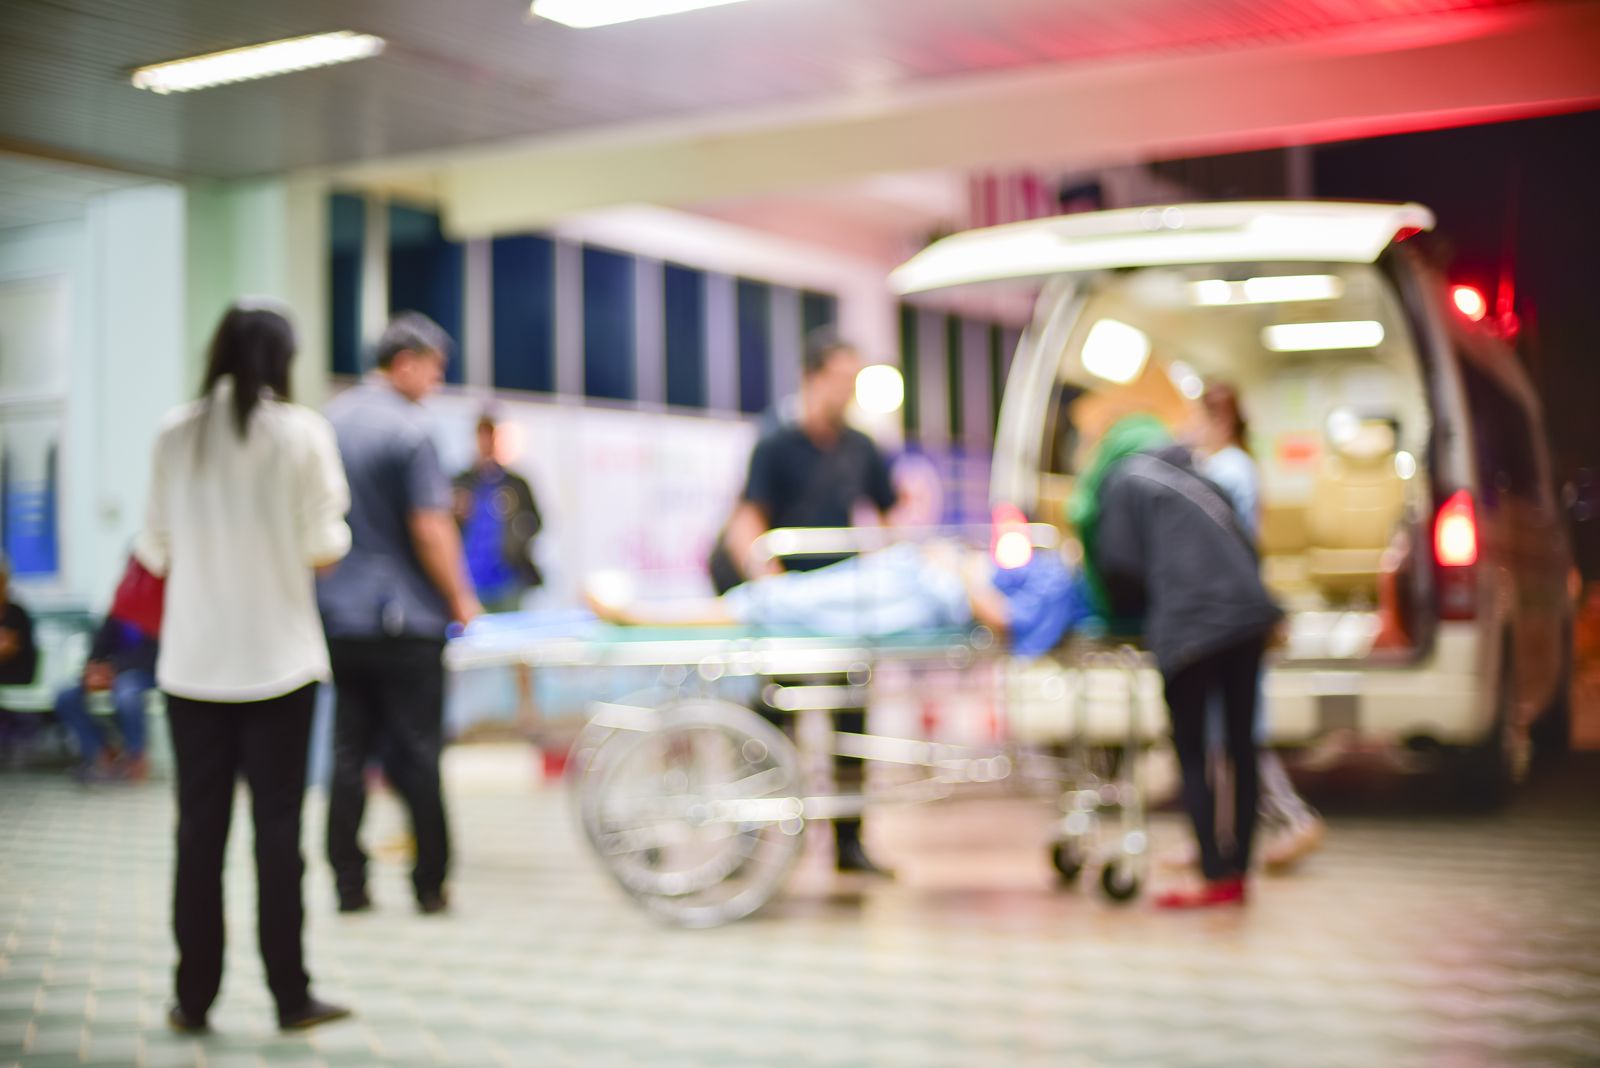 a patient arriving at a hospital in an ambulance shutterstock types of cpr